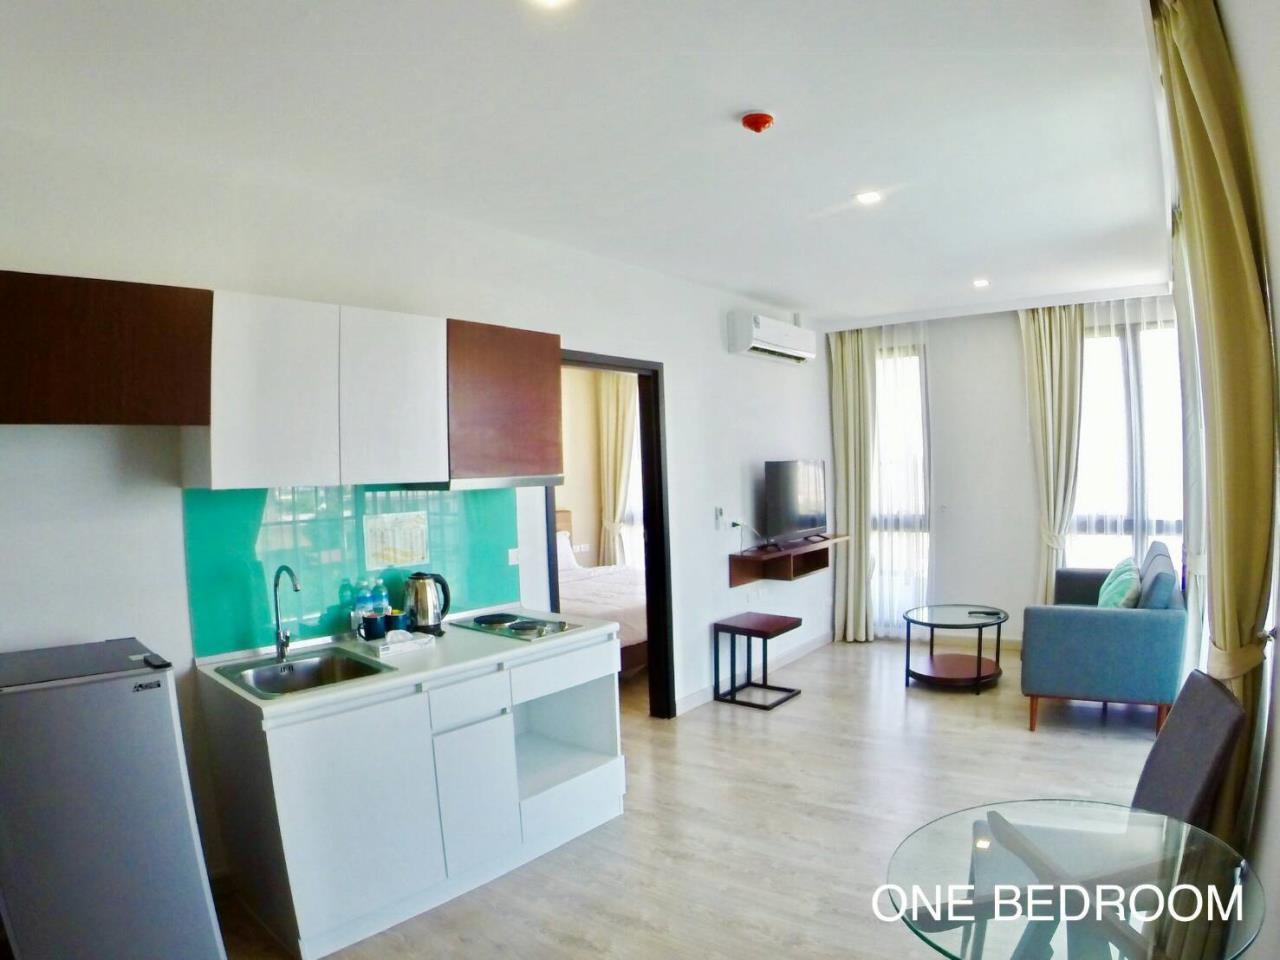 Agent - Arnupharp Sadudee Agency's New Airport condo for sell, Phuket Airport Condo Project. Guaranteed return of 6% for 3 years. New Condo with furniture, appliances Near Phuket Airport 1 km. Nai Yang Beach 700 meters. 7